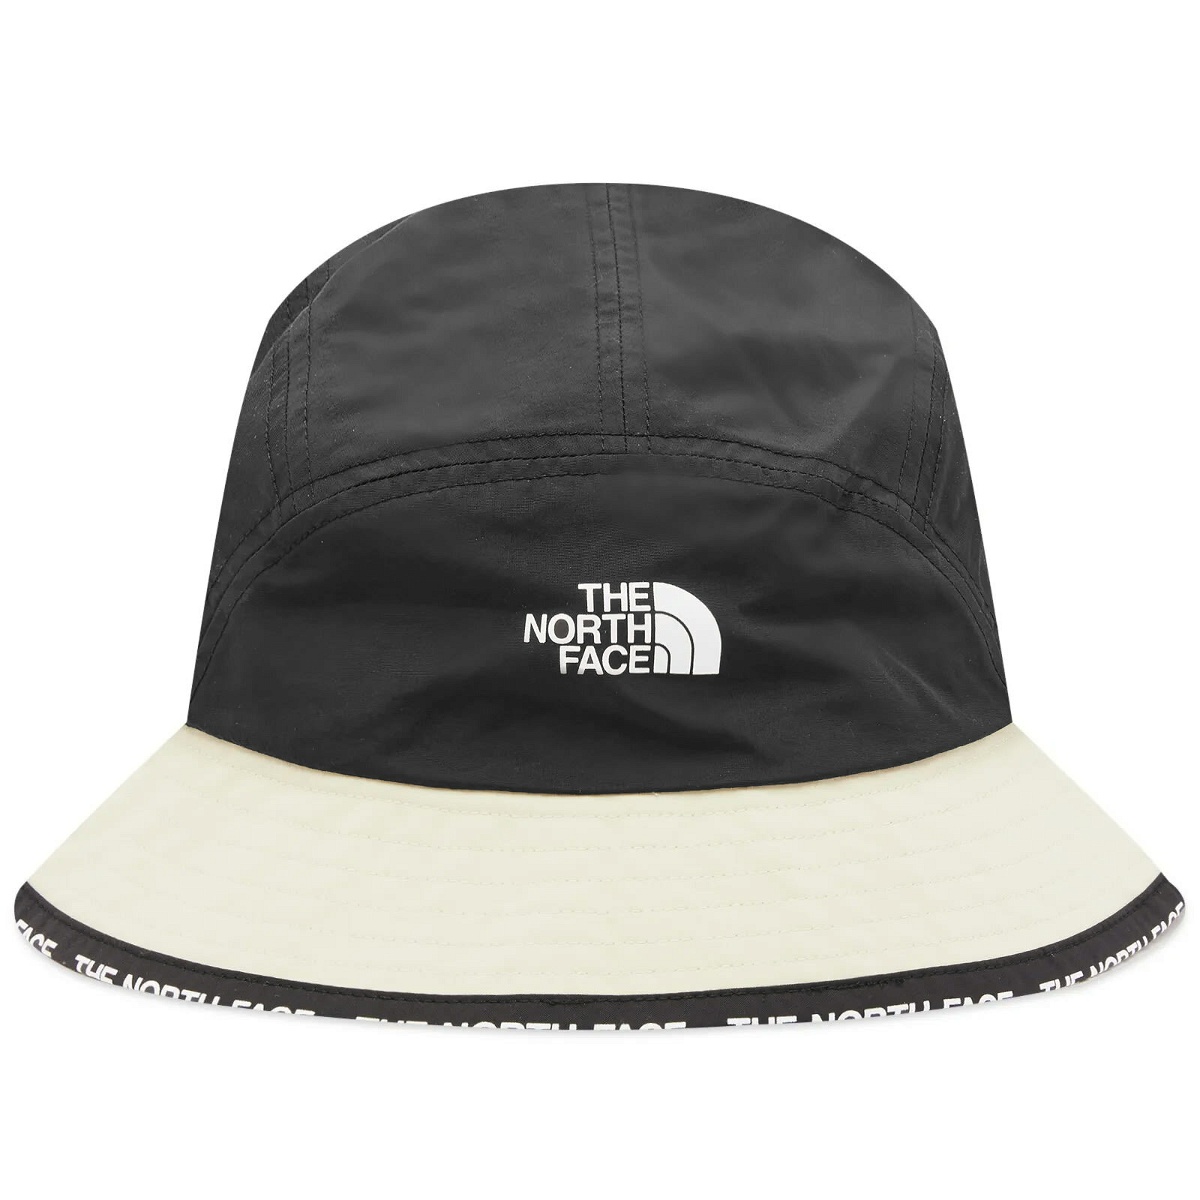 The North Face Women's Cypress Bucket Hat in Gravel The North Face